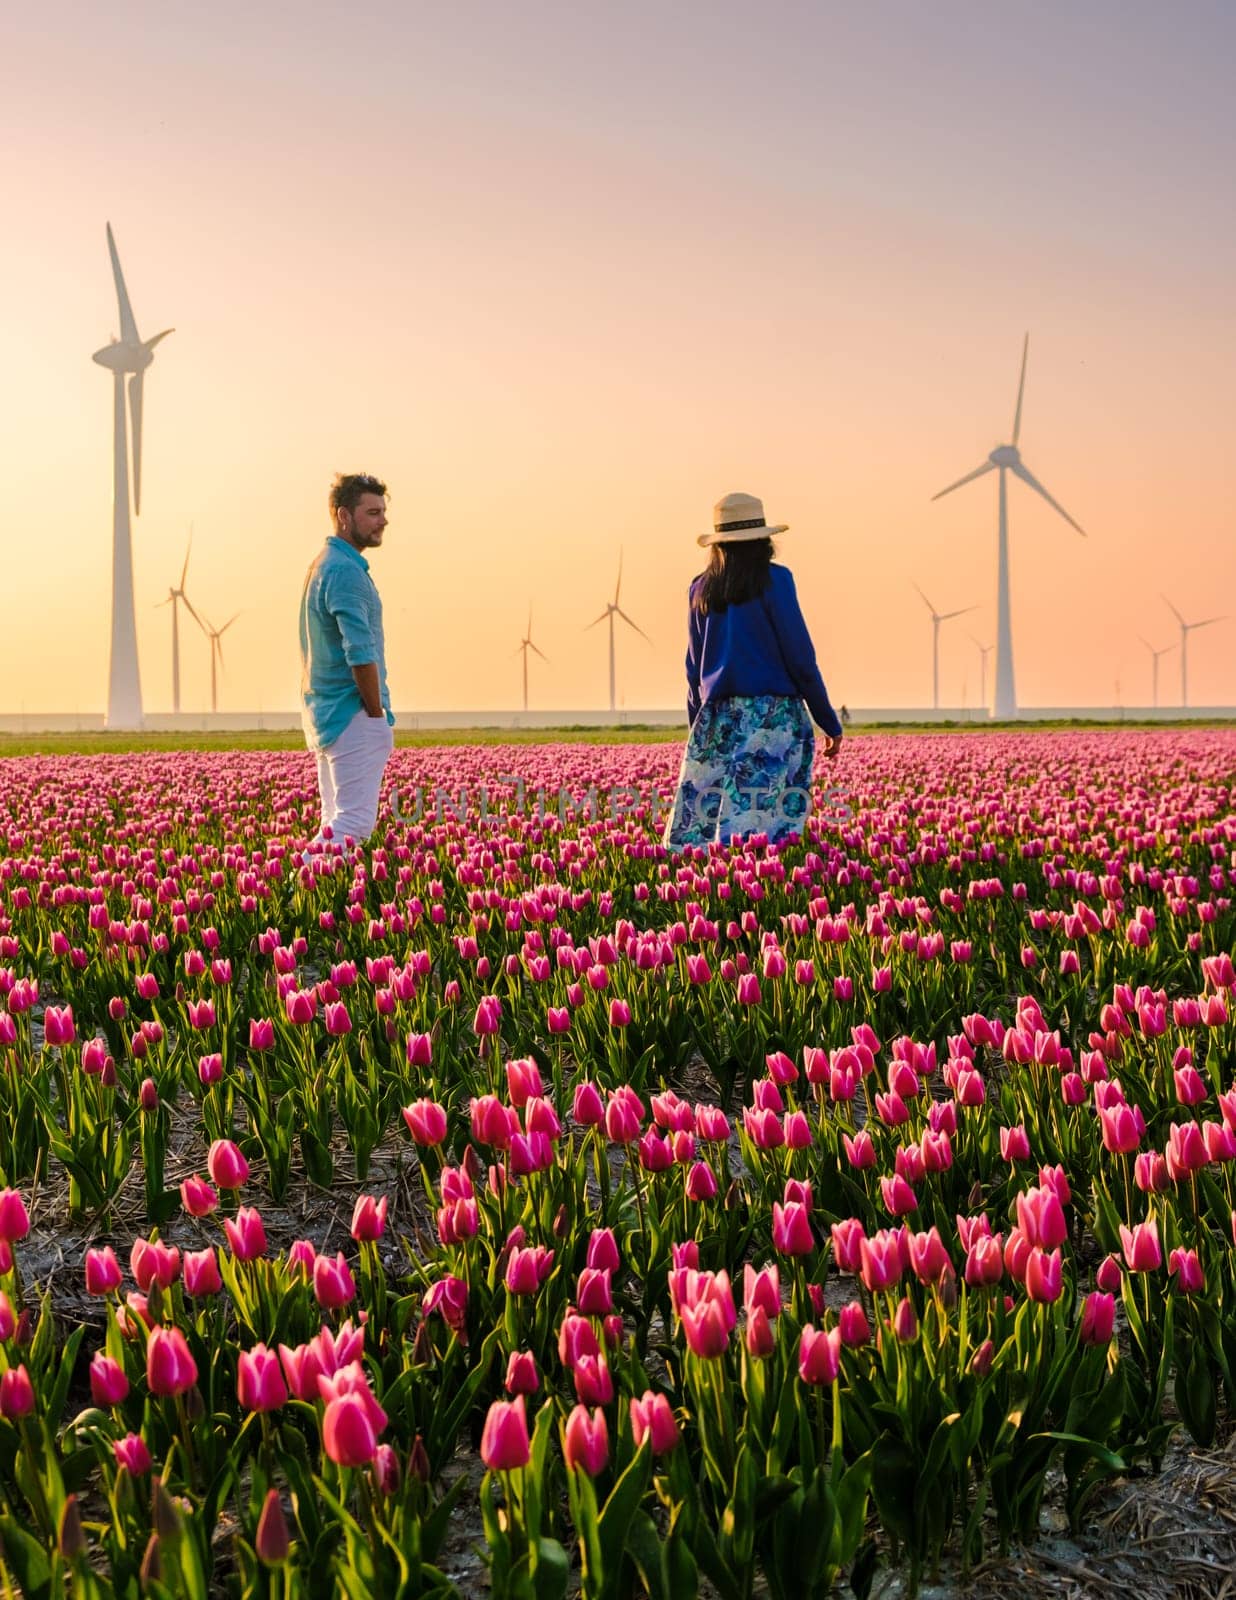 Beautiful sunset above the windmills on the field with tulips in the Netherlands, couple men and woman watching sunset in a tulip field in the Netherlands with a windmill turbine farm on background